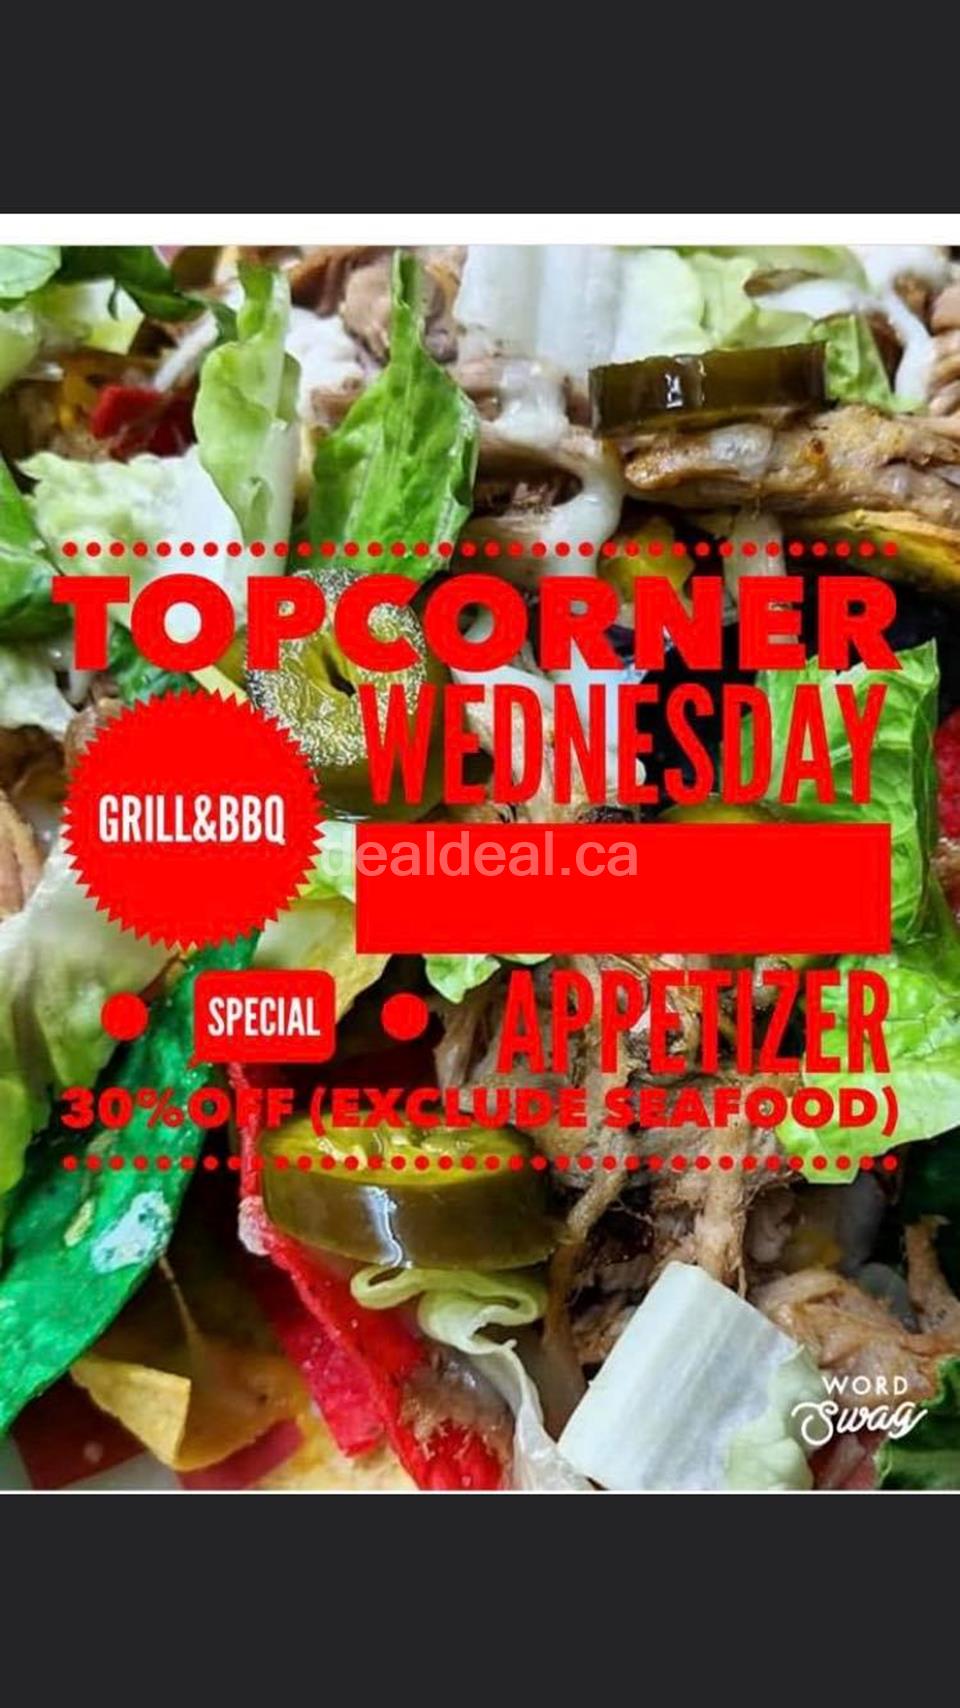 Wednesday special at Top Corner